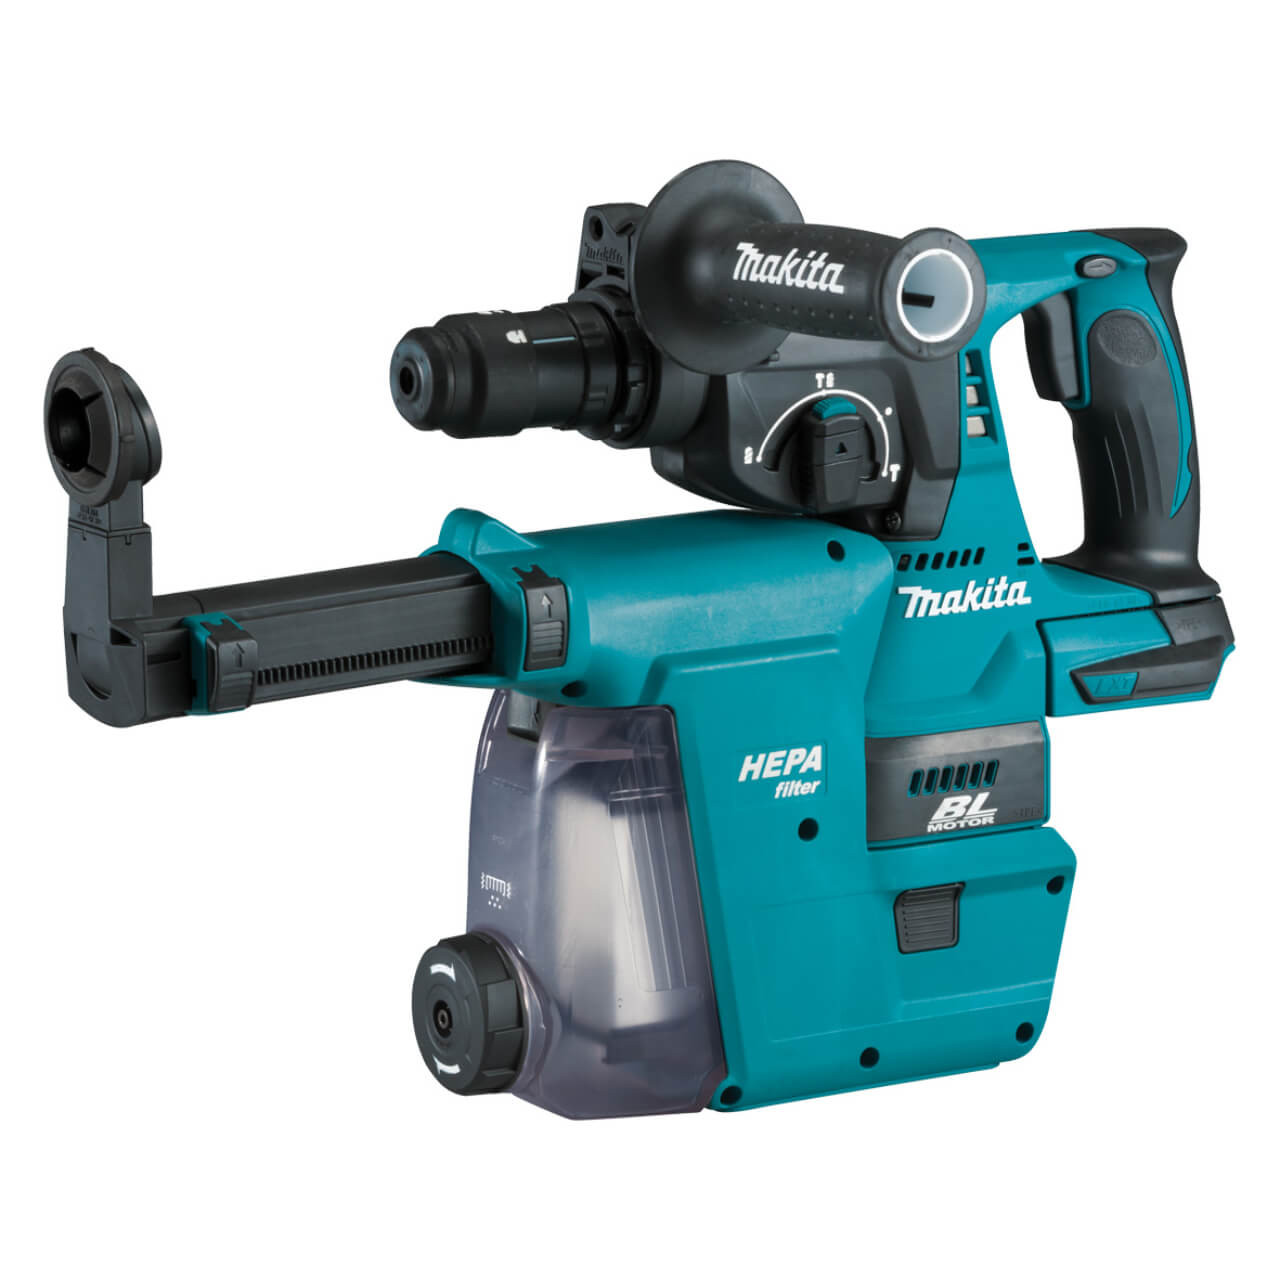 Makita 18V BRUSHLESS 24mm Rotary Hammer. Quick Change Drill Chuck. Dust Extraction Adaptor (DX07). Case - Tool Only